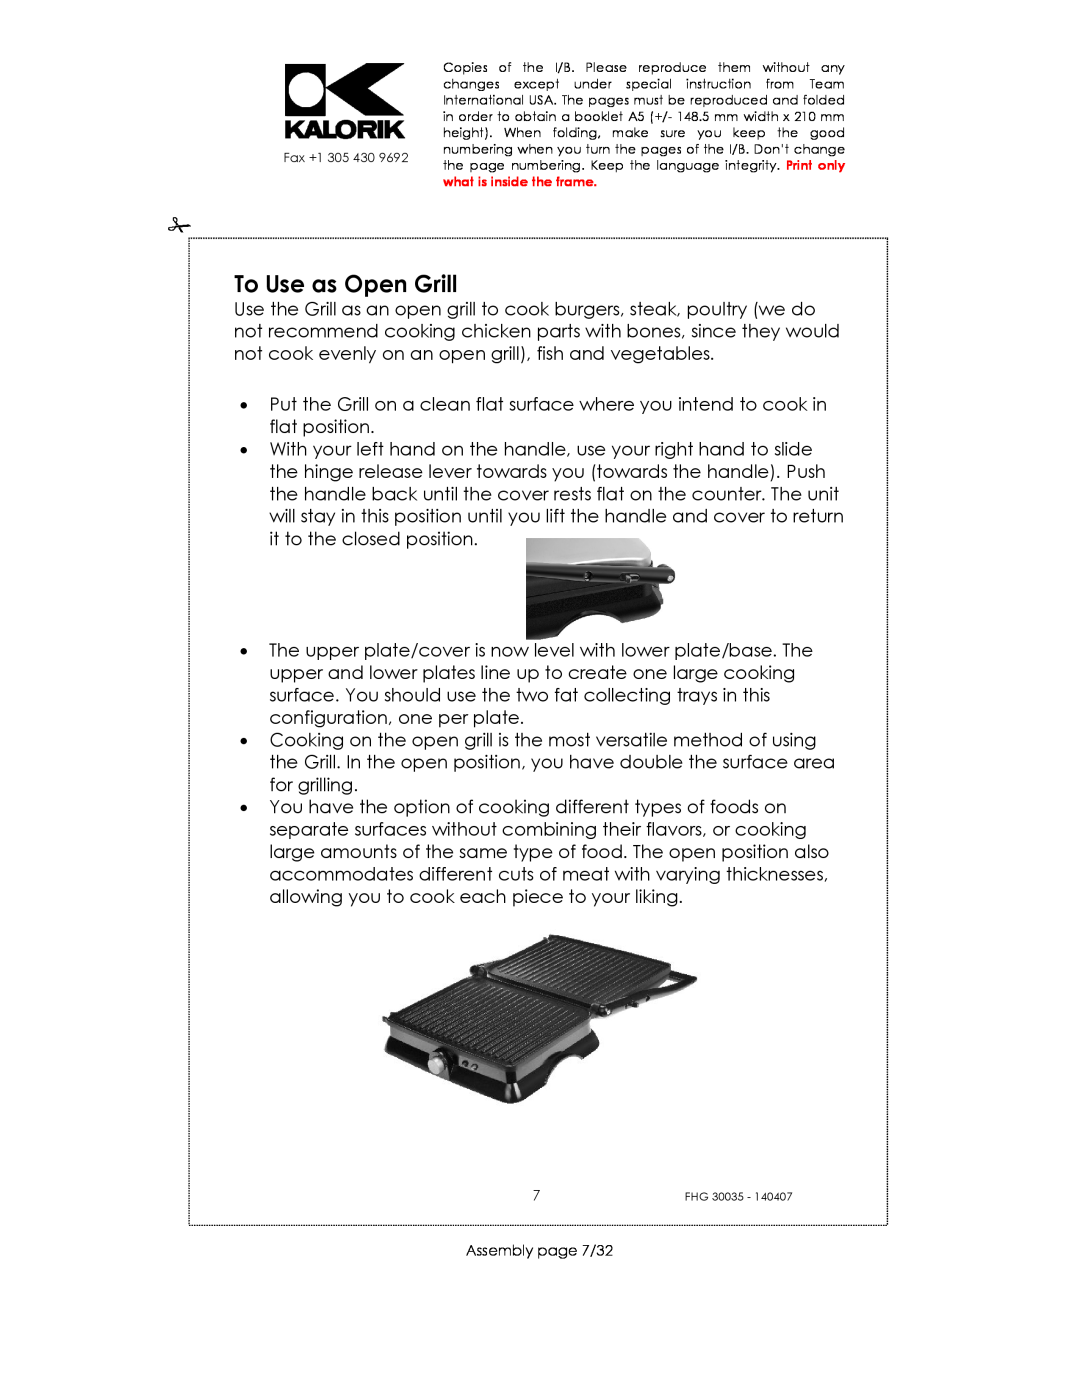 Kalorik FHG 30035 manual To Use as Open Grill, Assembly page 7/32 